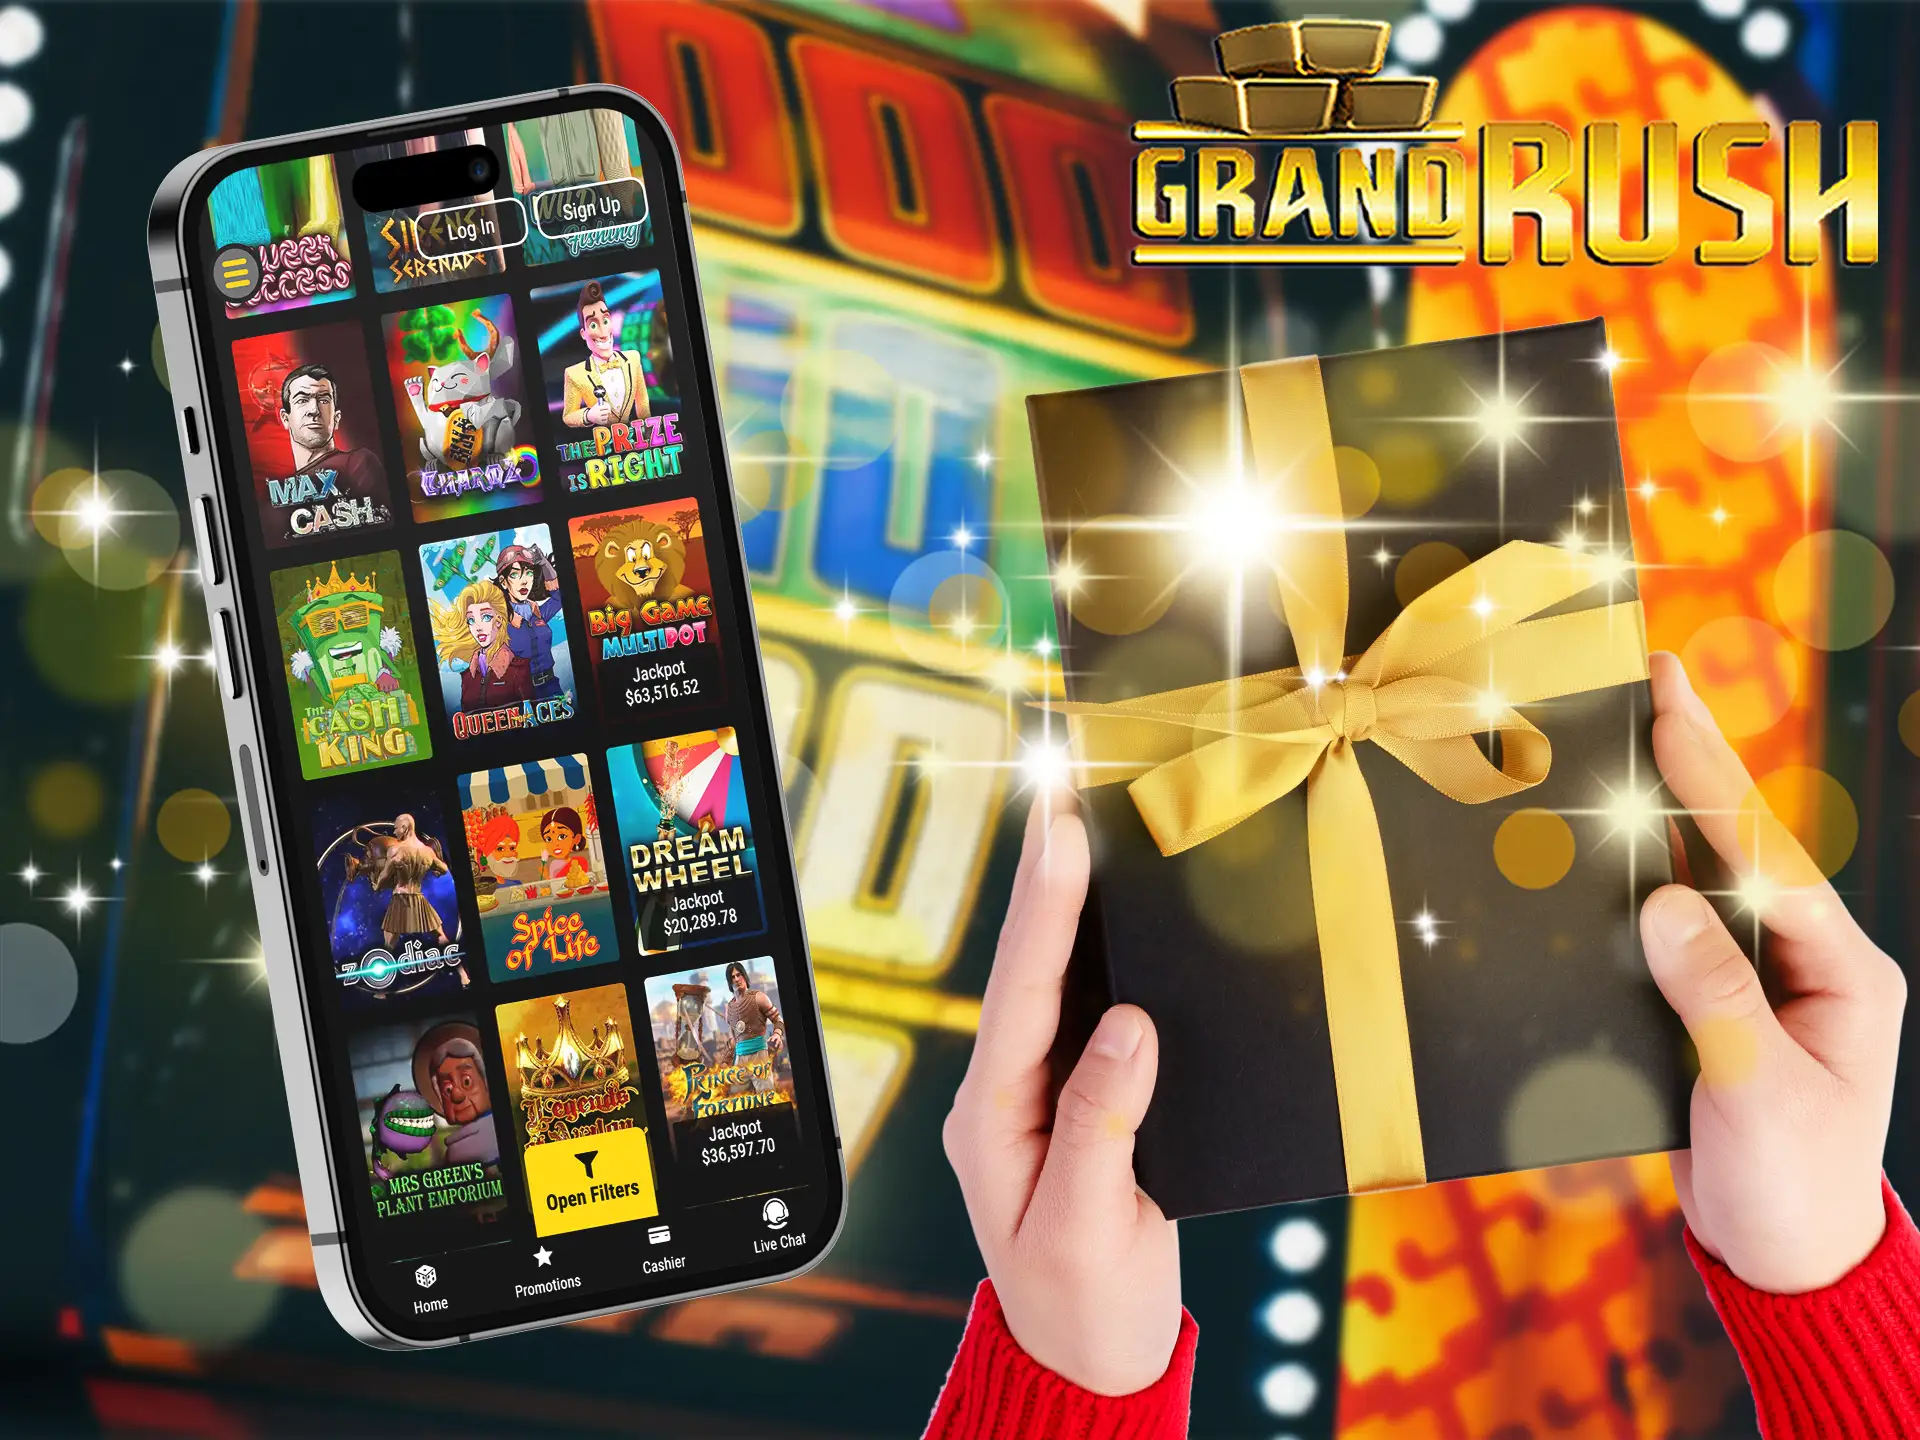 For Blackjack Grand Rush offers interesting bonuses and promotions.